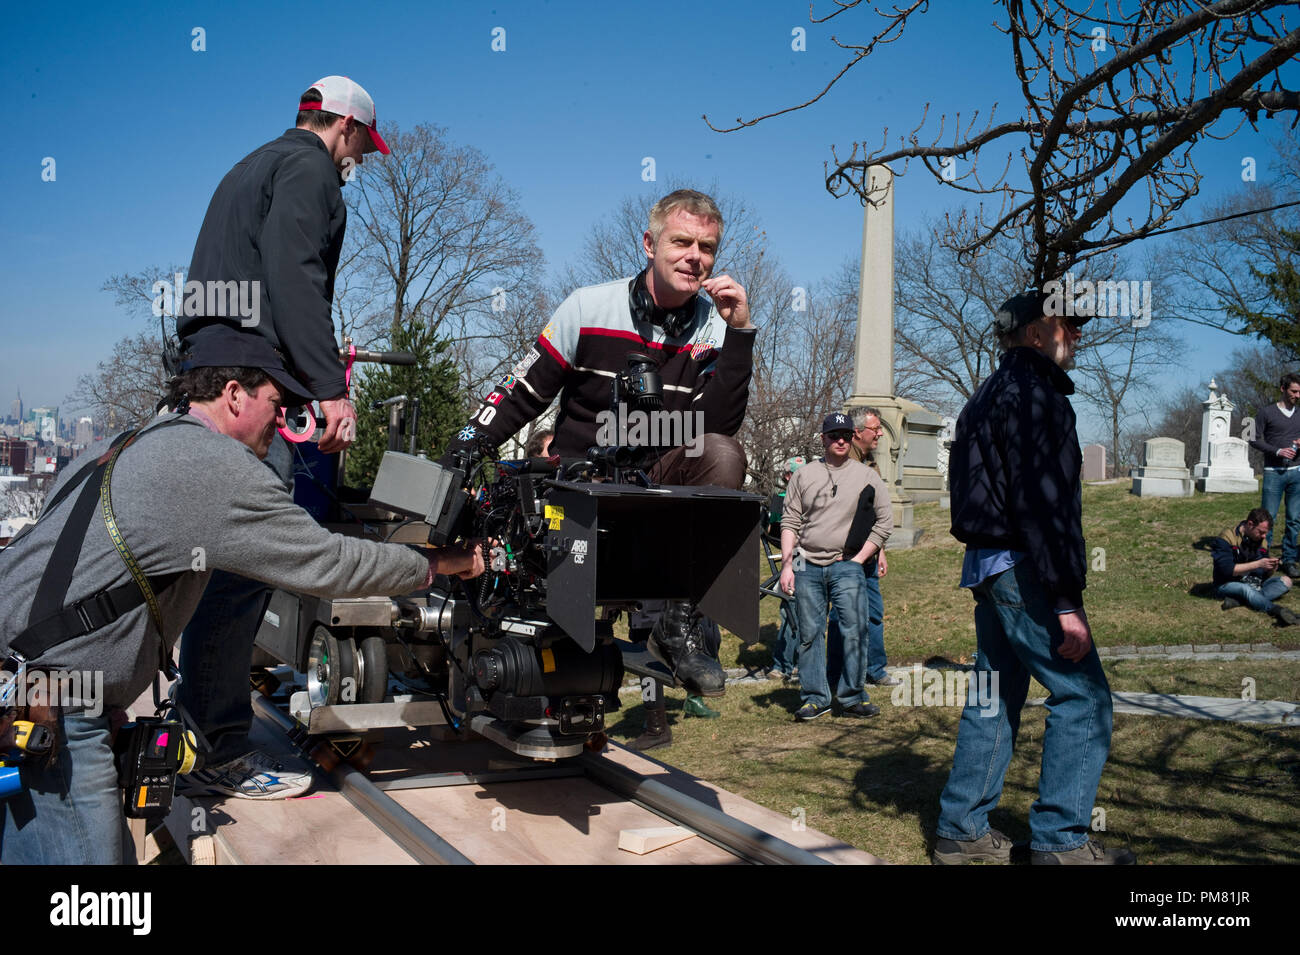 Director STEPHEN DALDRY (center) during the filming of Warner Bros. Pictures drama EXTREMELY LOUD & INCREDIBLY CLOSE, a Warner Bros. Pictures release. Stock Photo